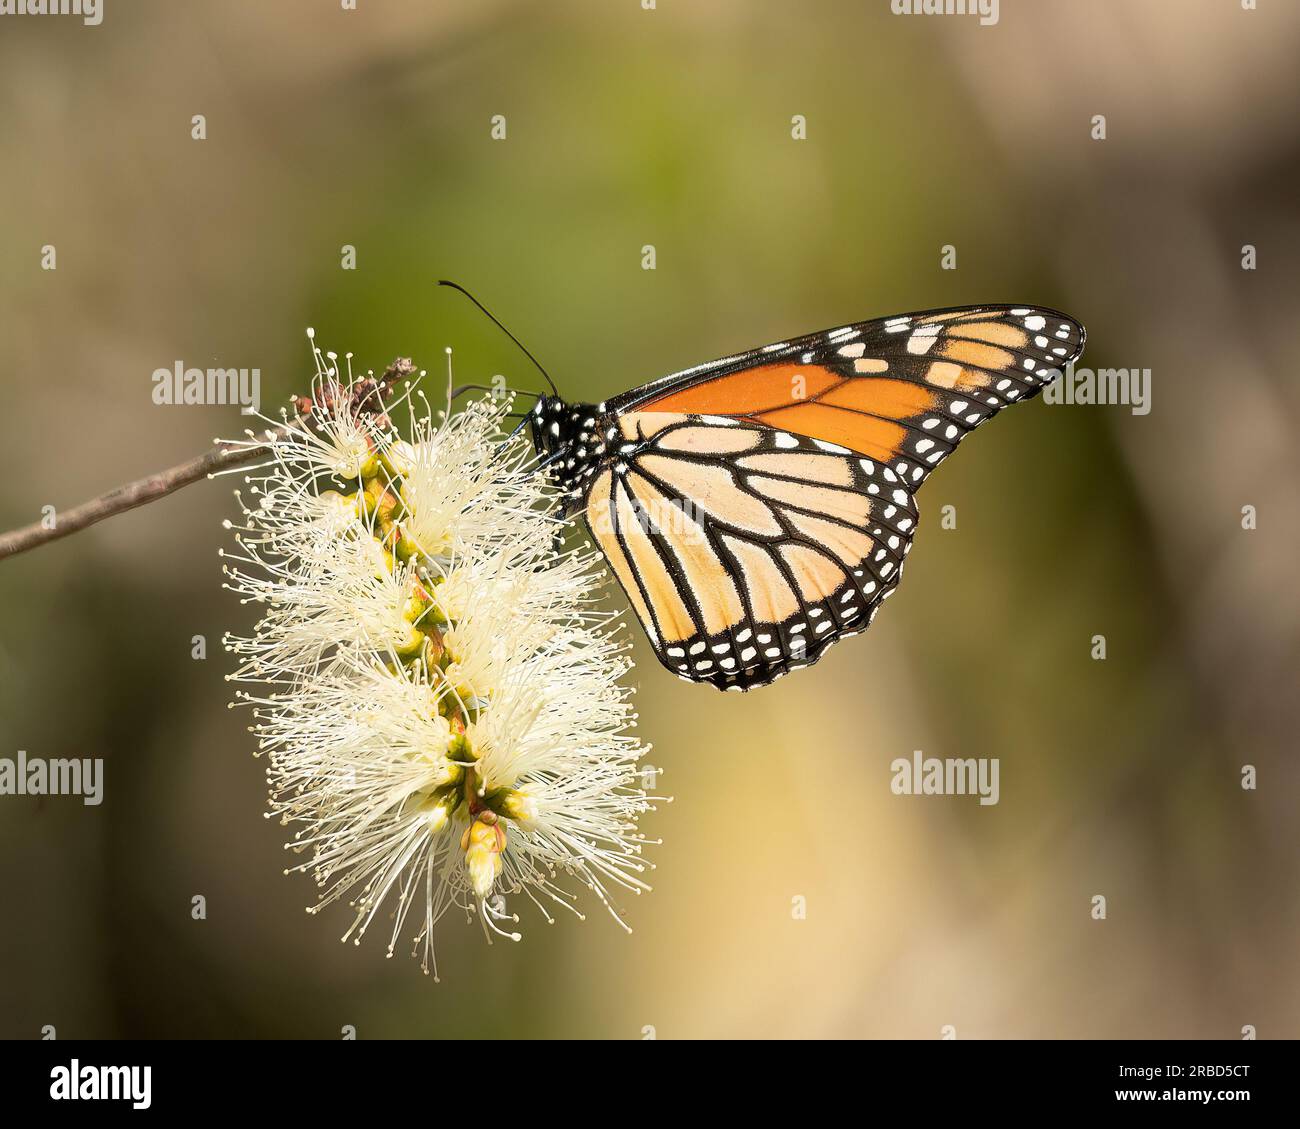 Monarch butterflies listed as endangered, Climate change, drought and habitat losses are some of the key factors that have contributed to the sharp de Stock Photo